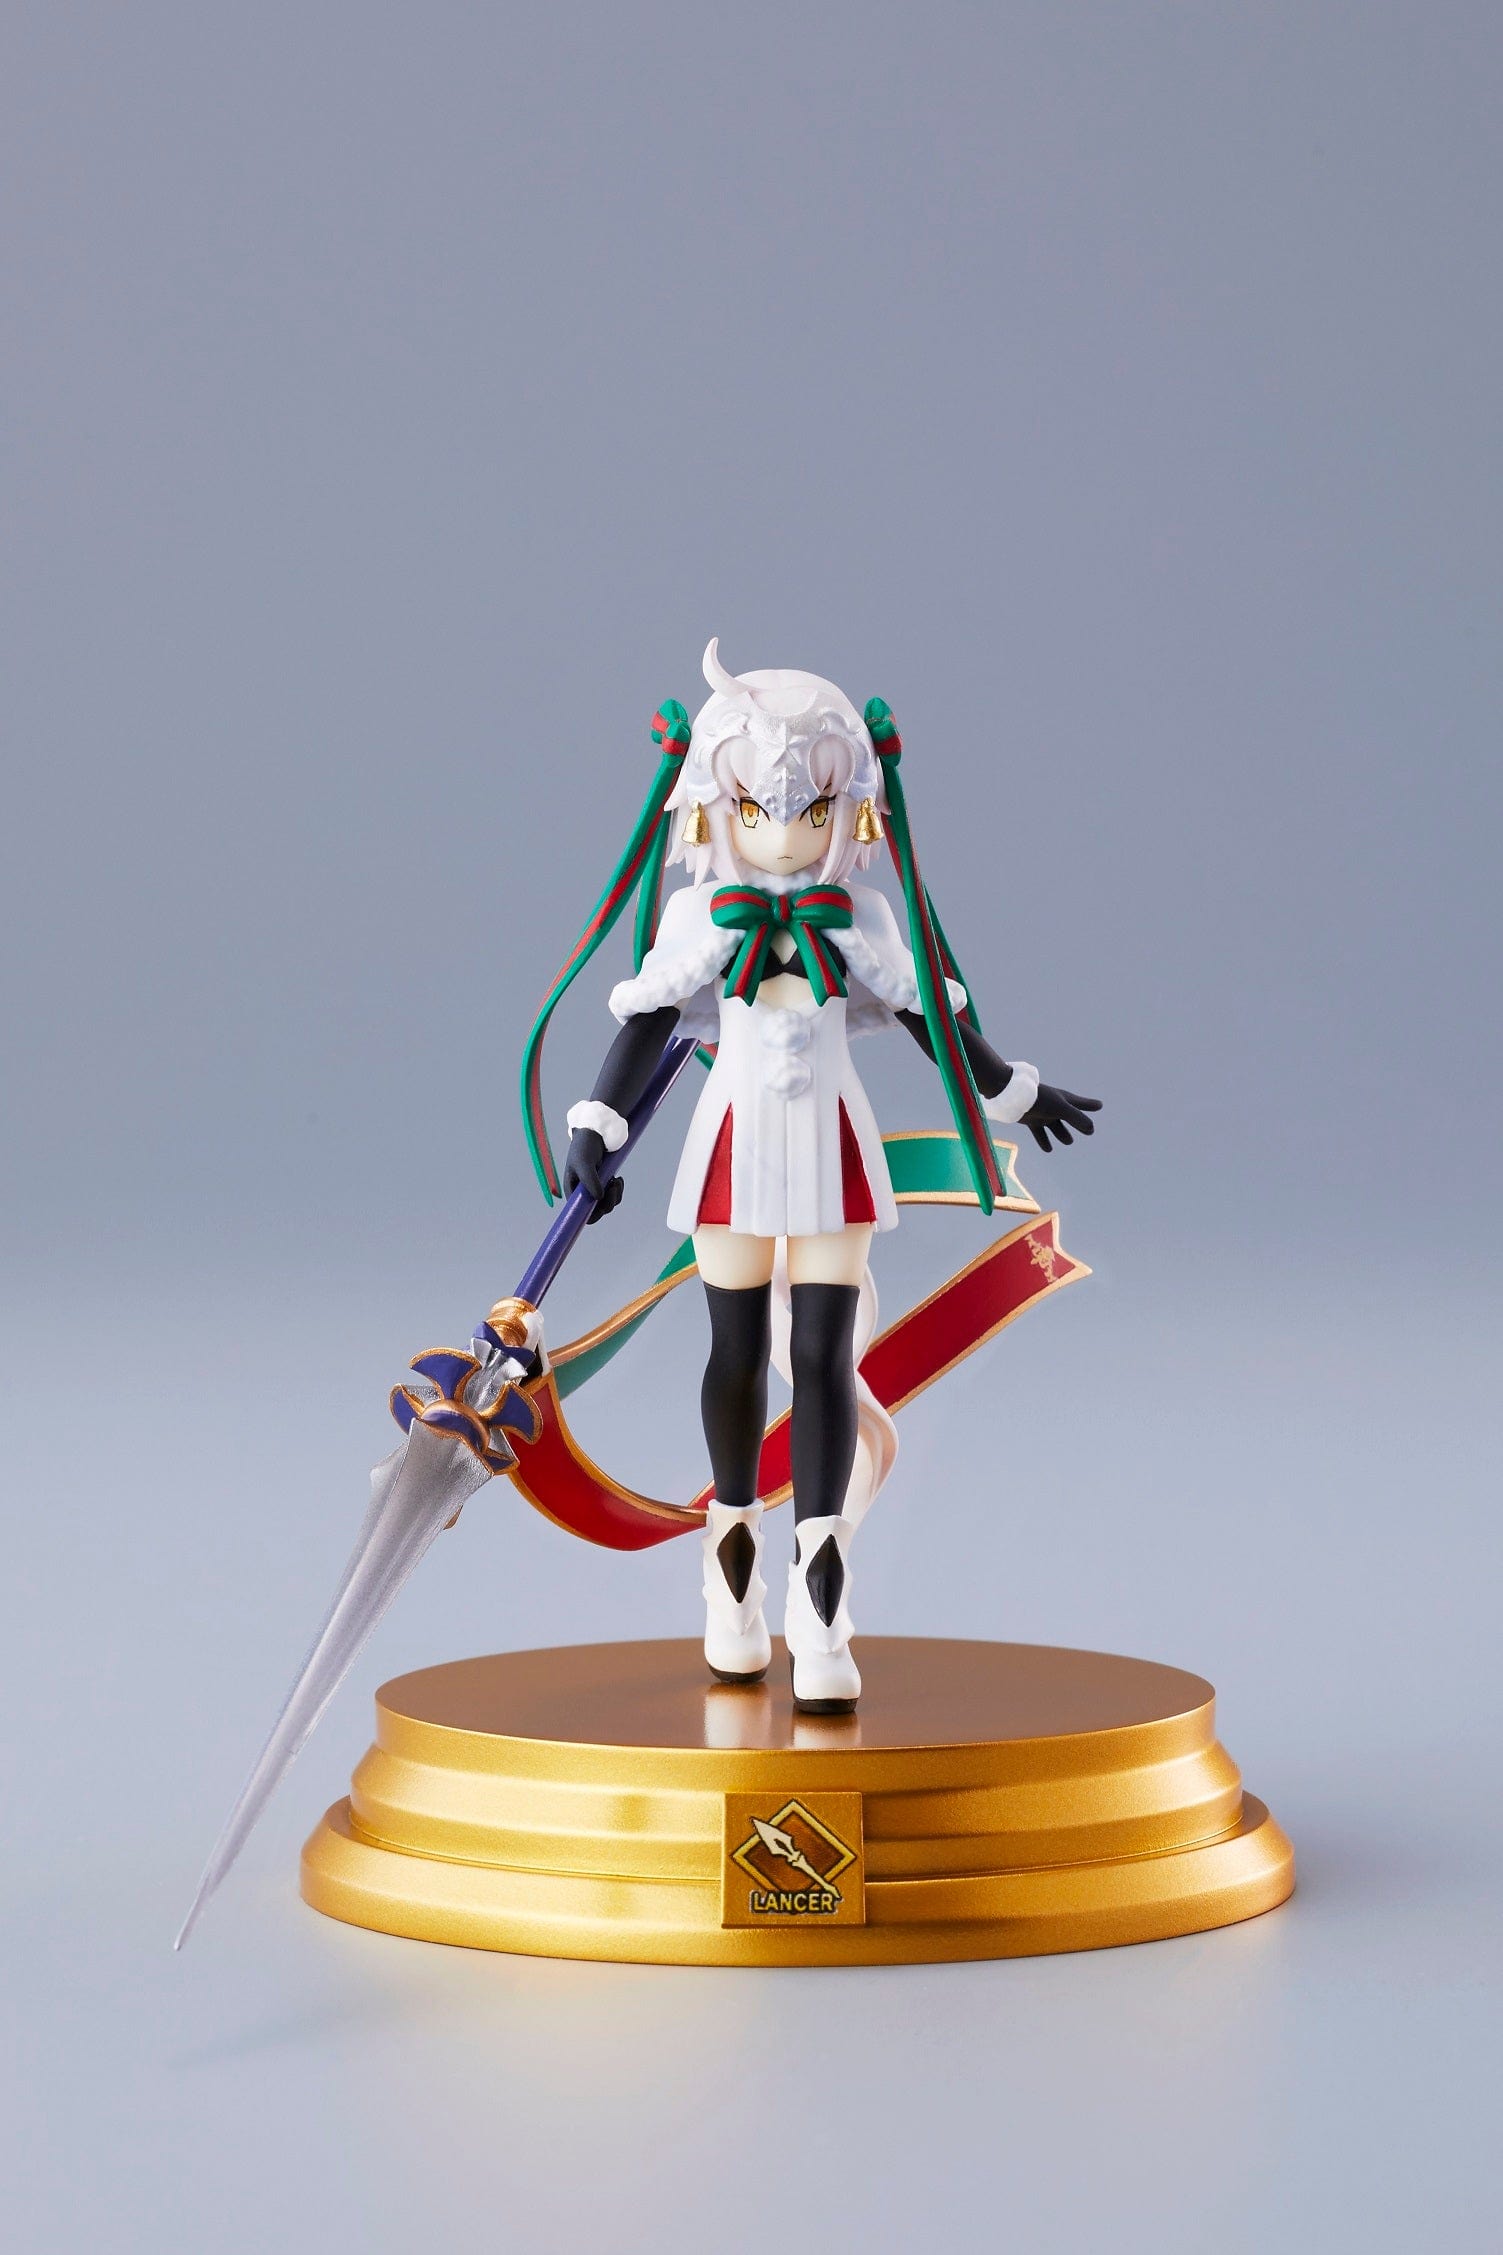 Aniplex+ Fate/Grand Order Duel Collection Figure Vol.9